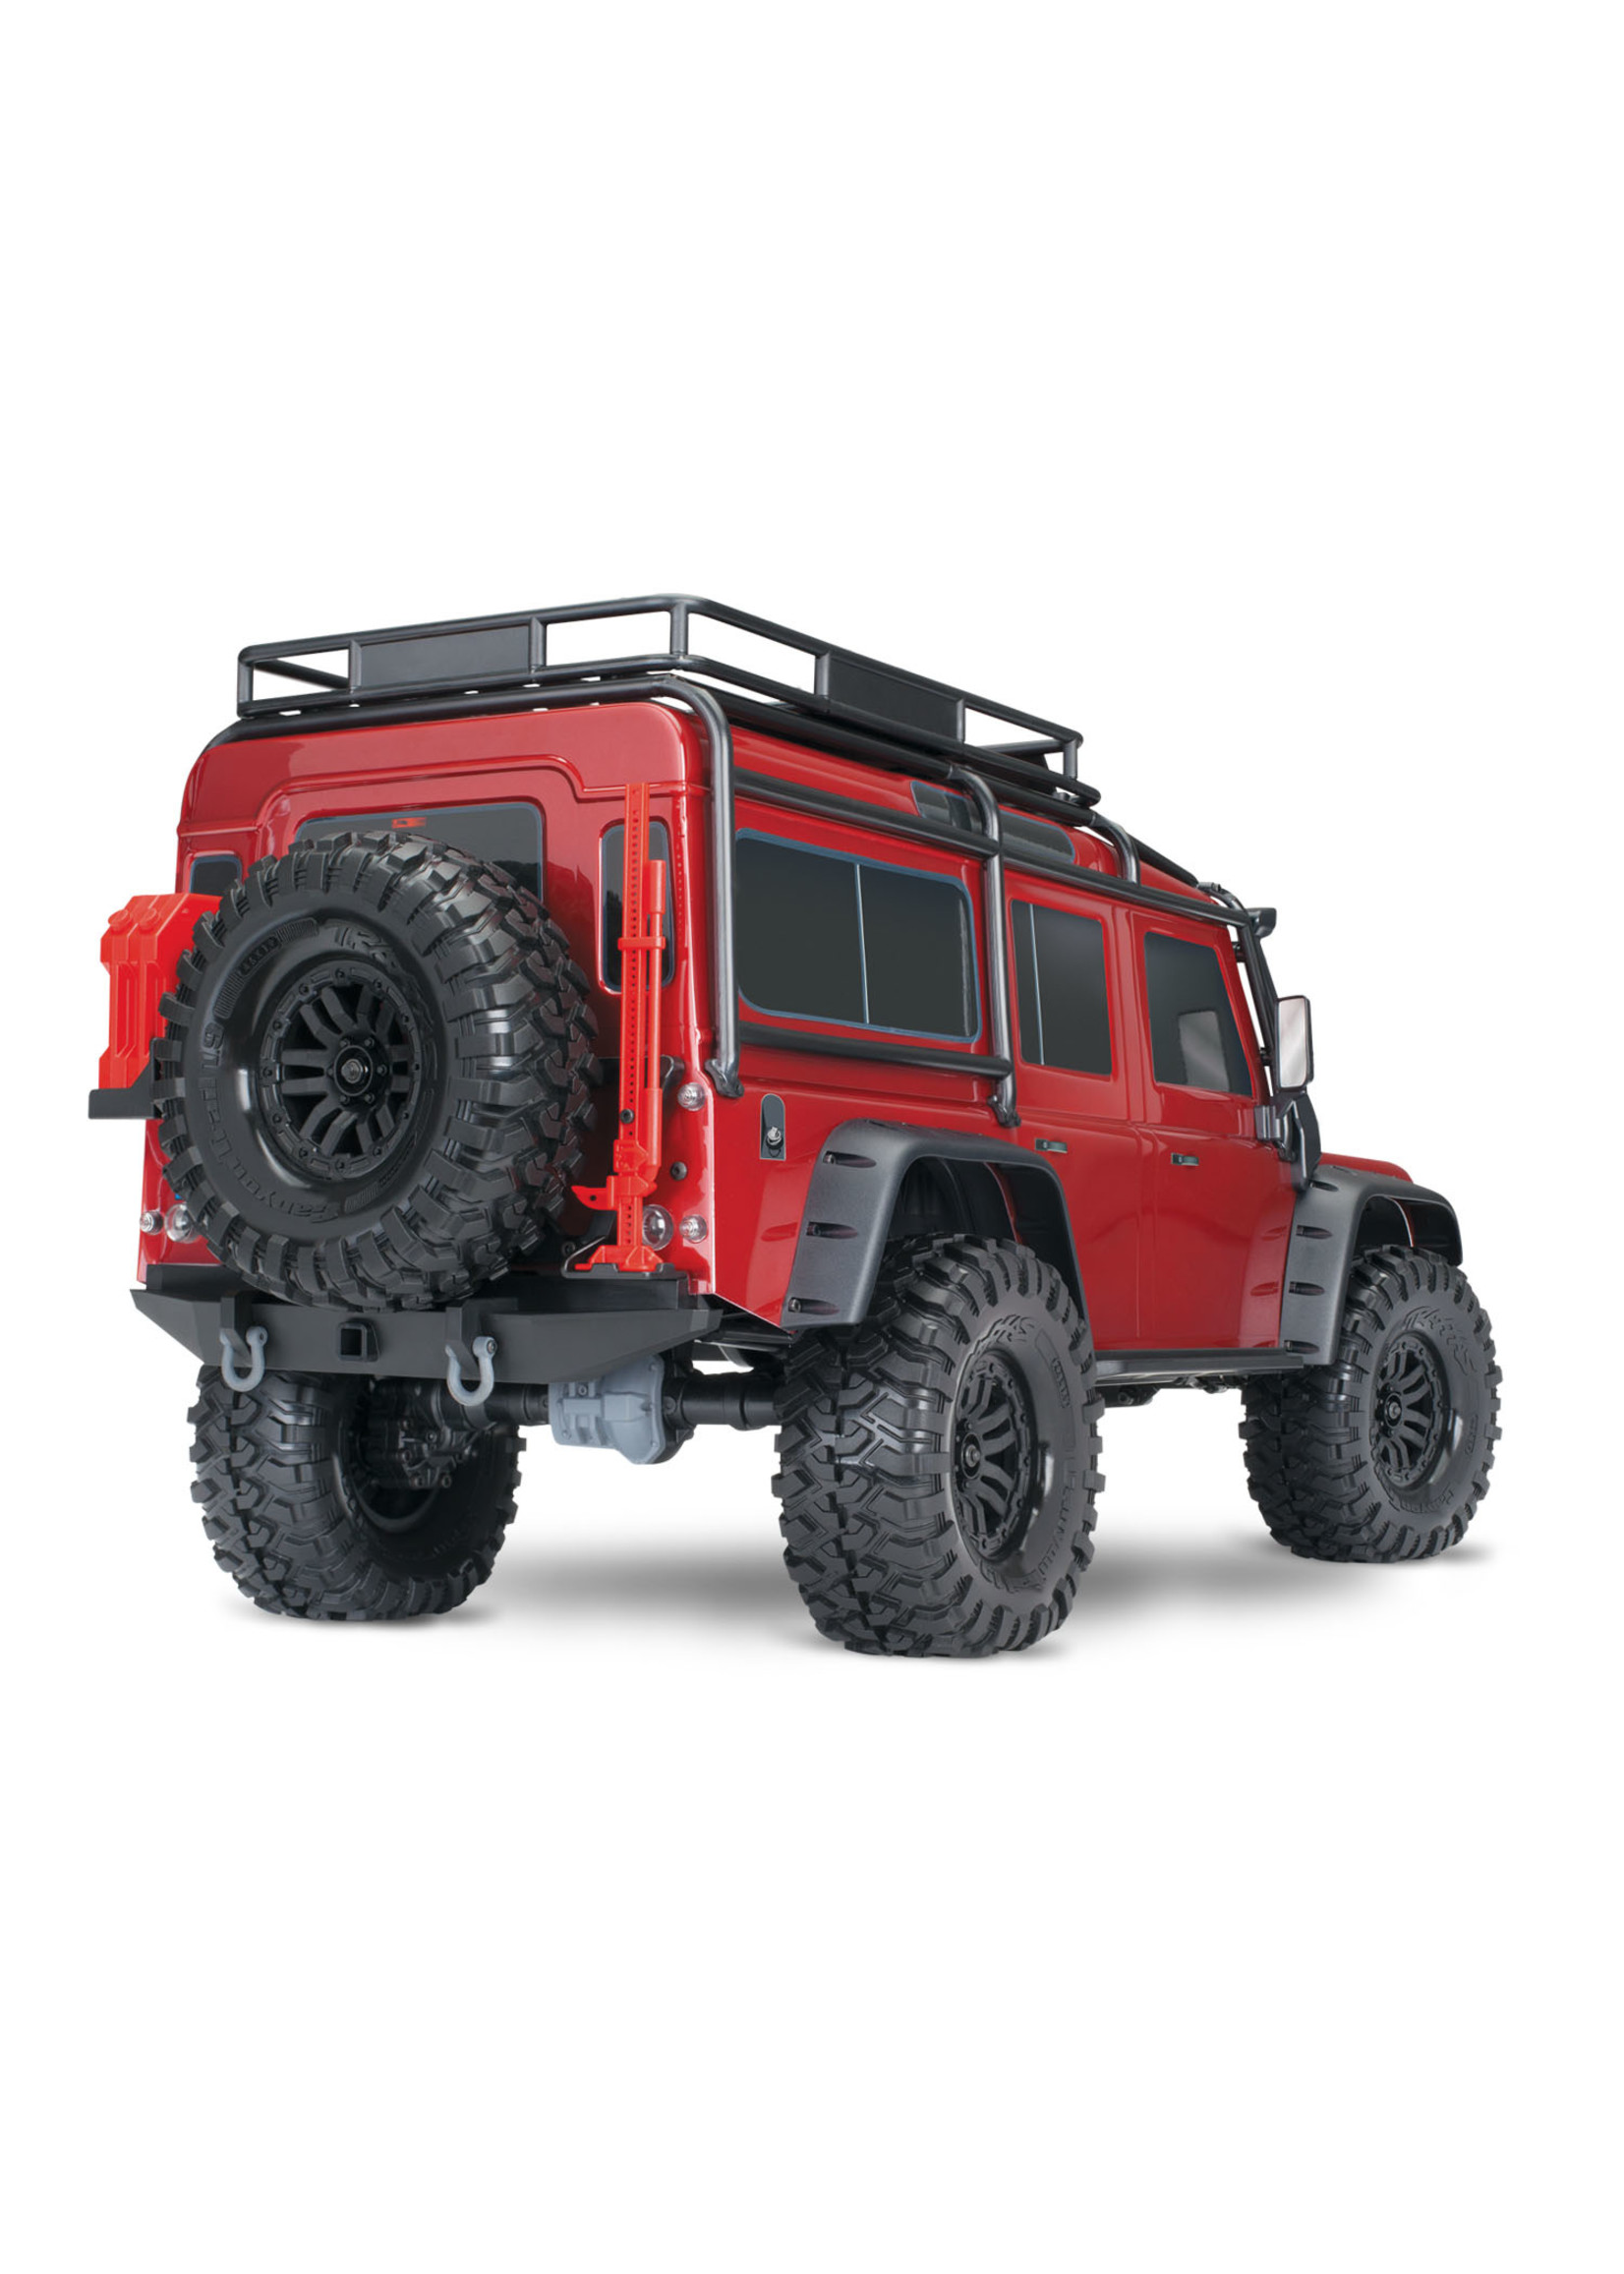 Traxxas 1/10 TRX-4 Defender RTR Scale and Trail Crawler - Red